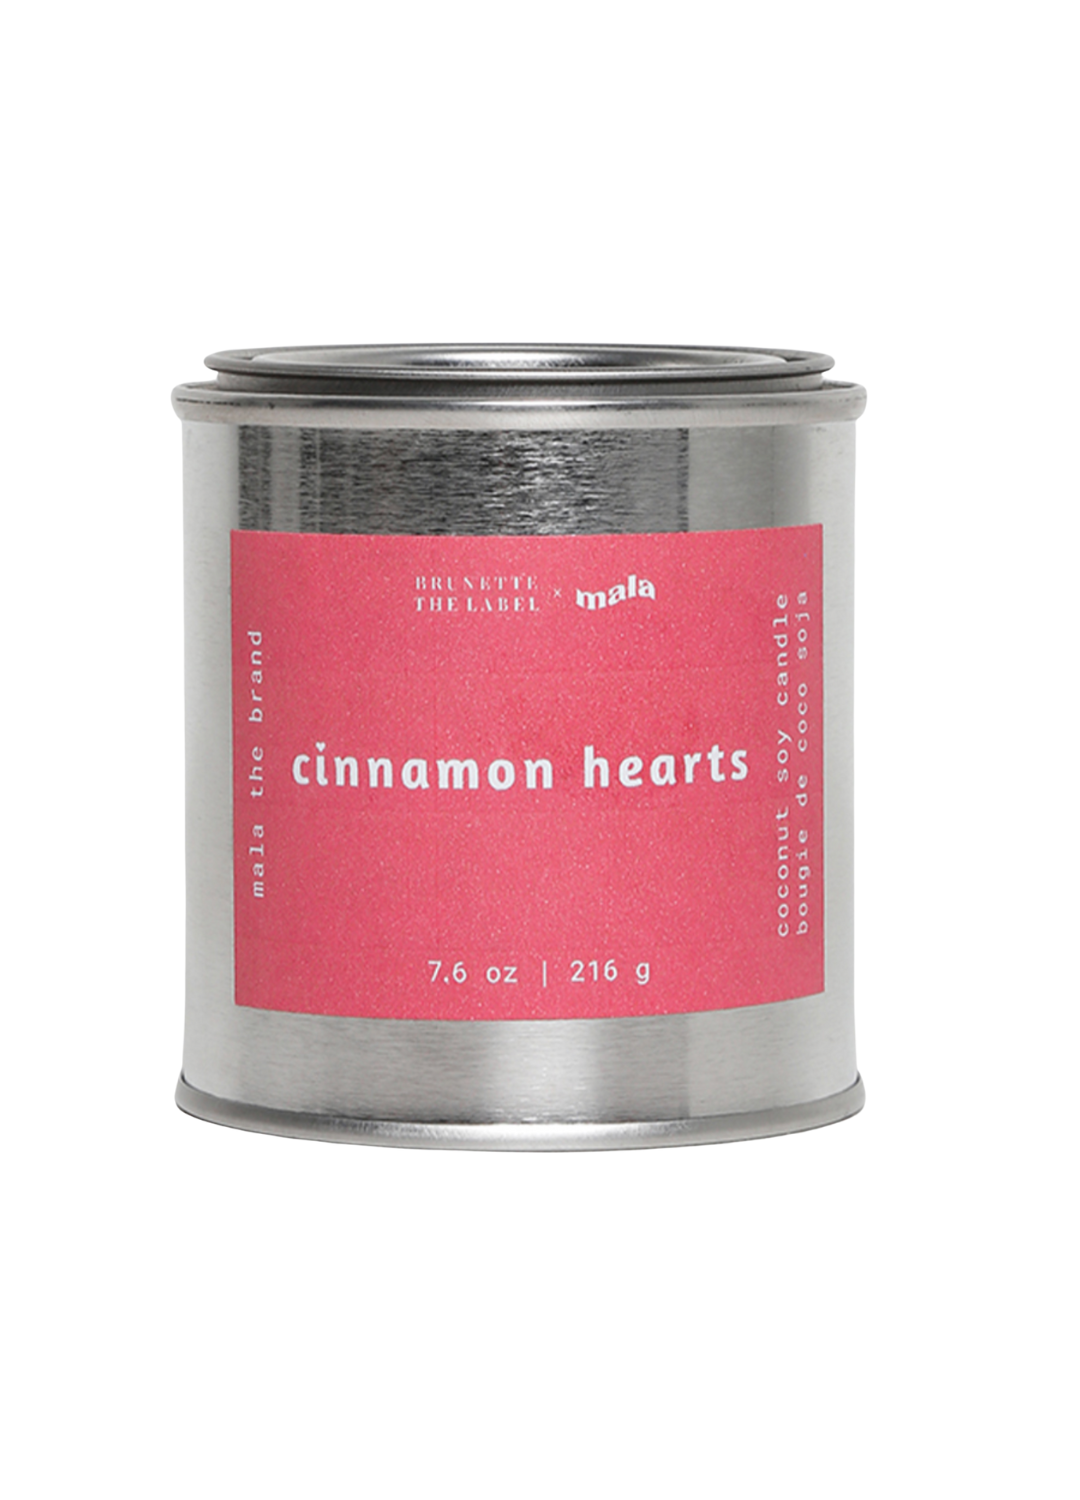 Cinnamon Hearts Scented Candle